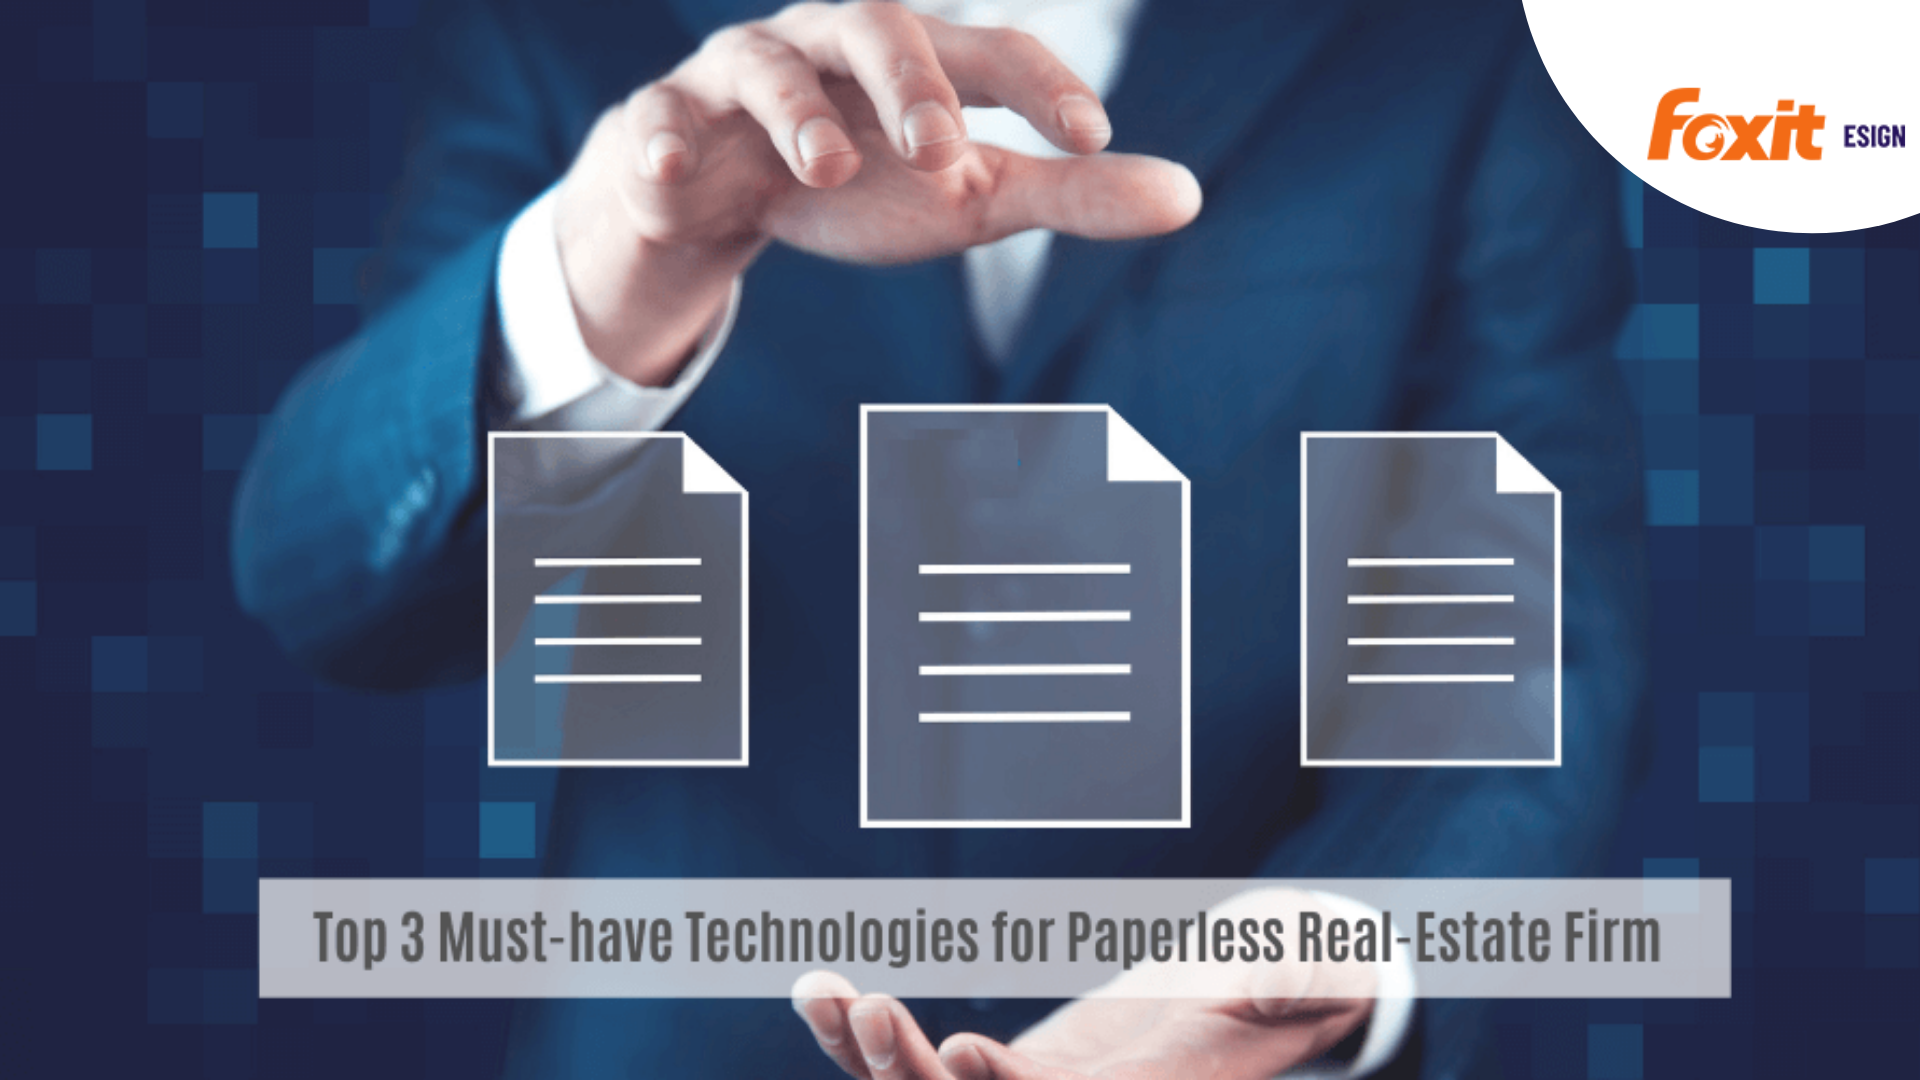 Top 3 Must-Have Technologies for Paperless Real Estate Firm